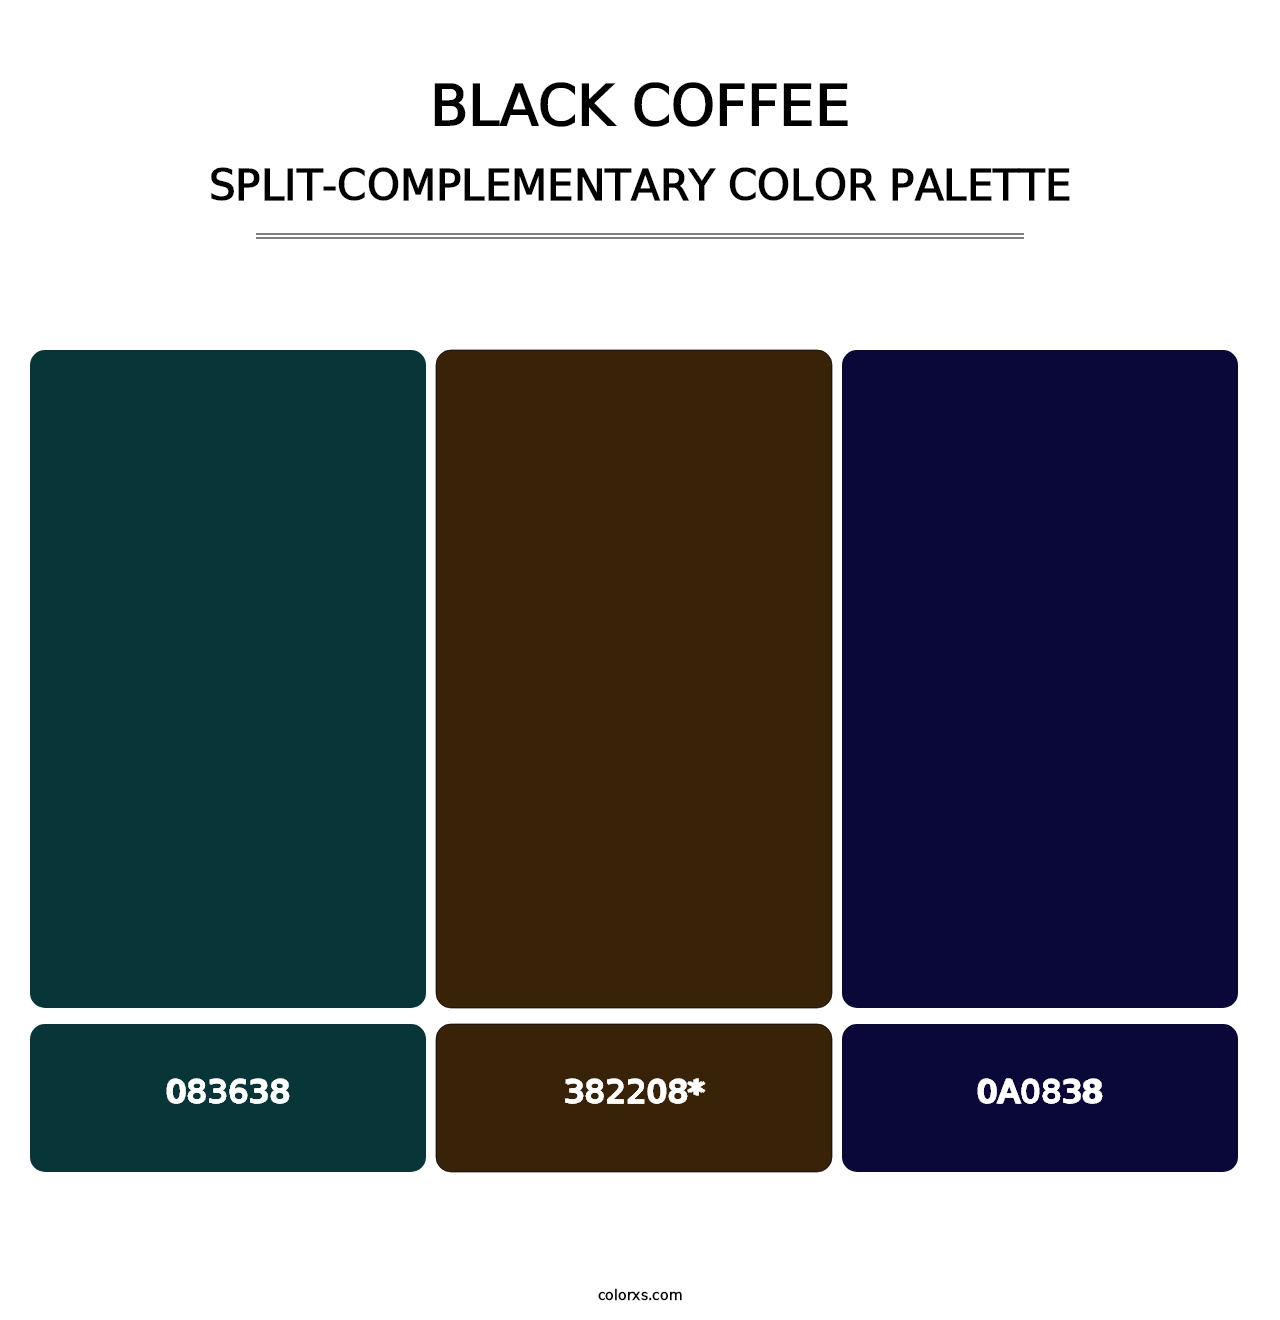 Black Coffee - Split-Complementary Color Palette